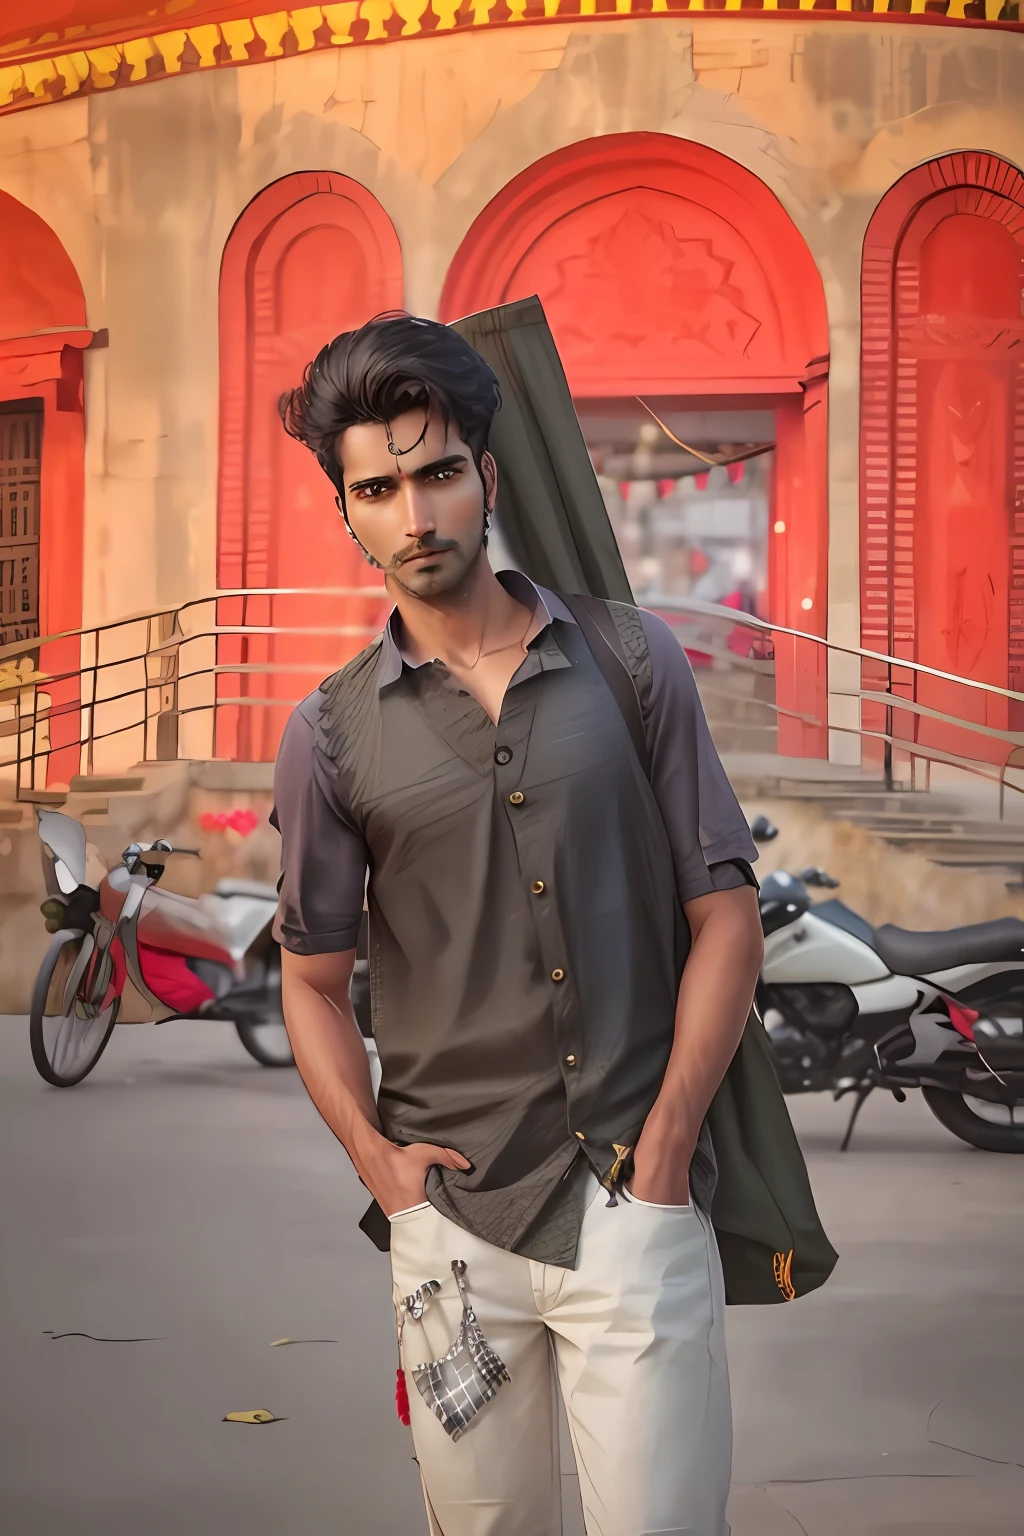 photo of an Indian man, wearing a red argyle vest, green collared shirt, and black jeans,  bokeh, outdoor background, masterpiece, high quality, photorealistic, fashion realistic oile netureal 4k ultra